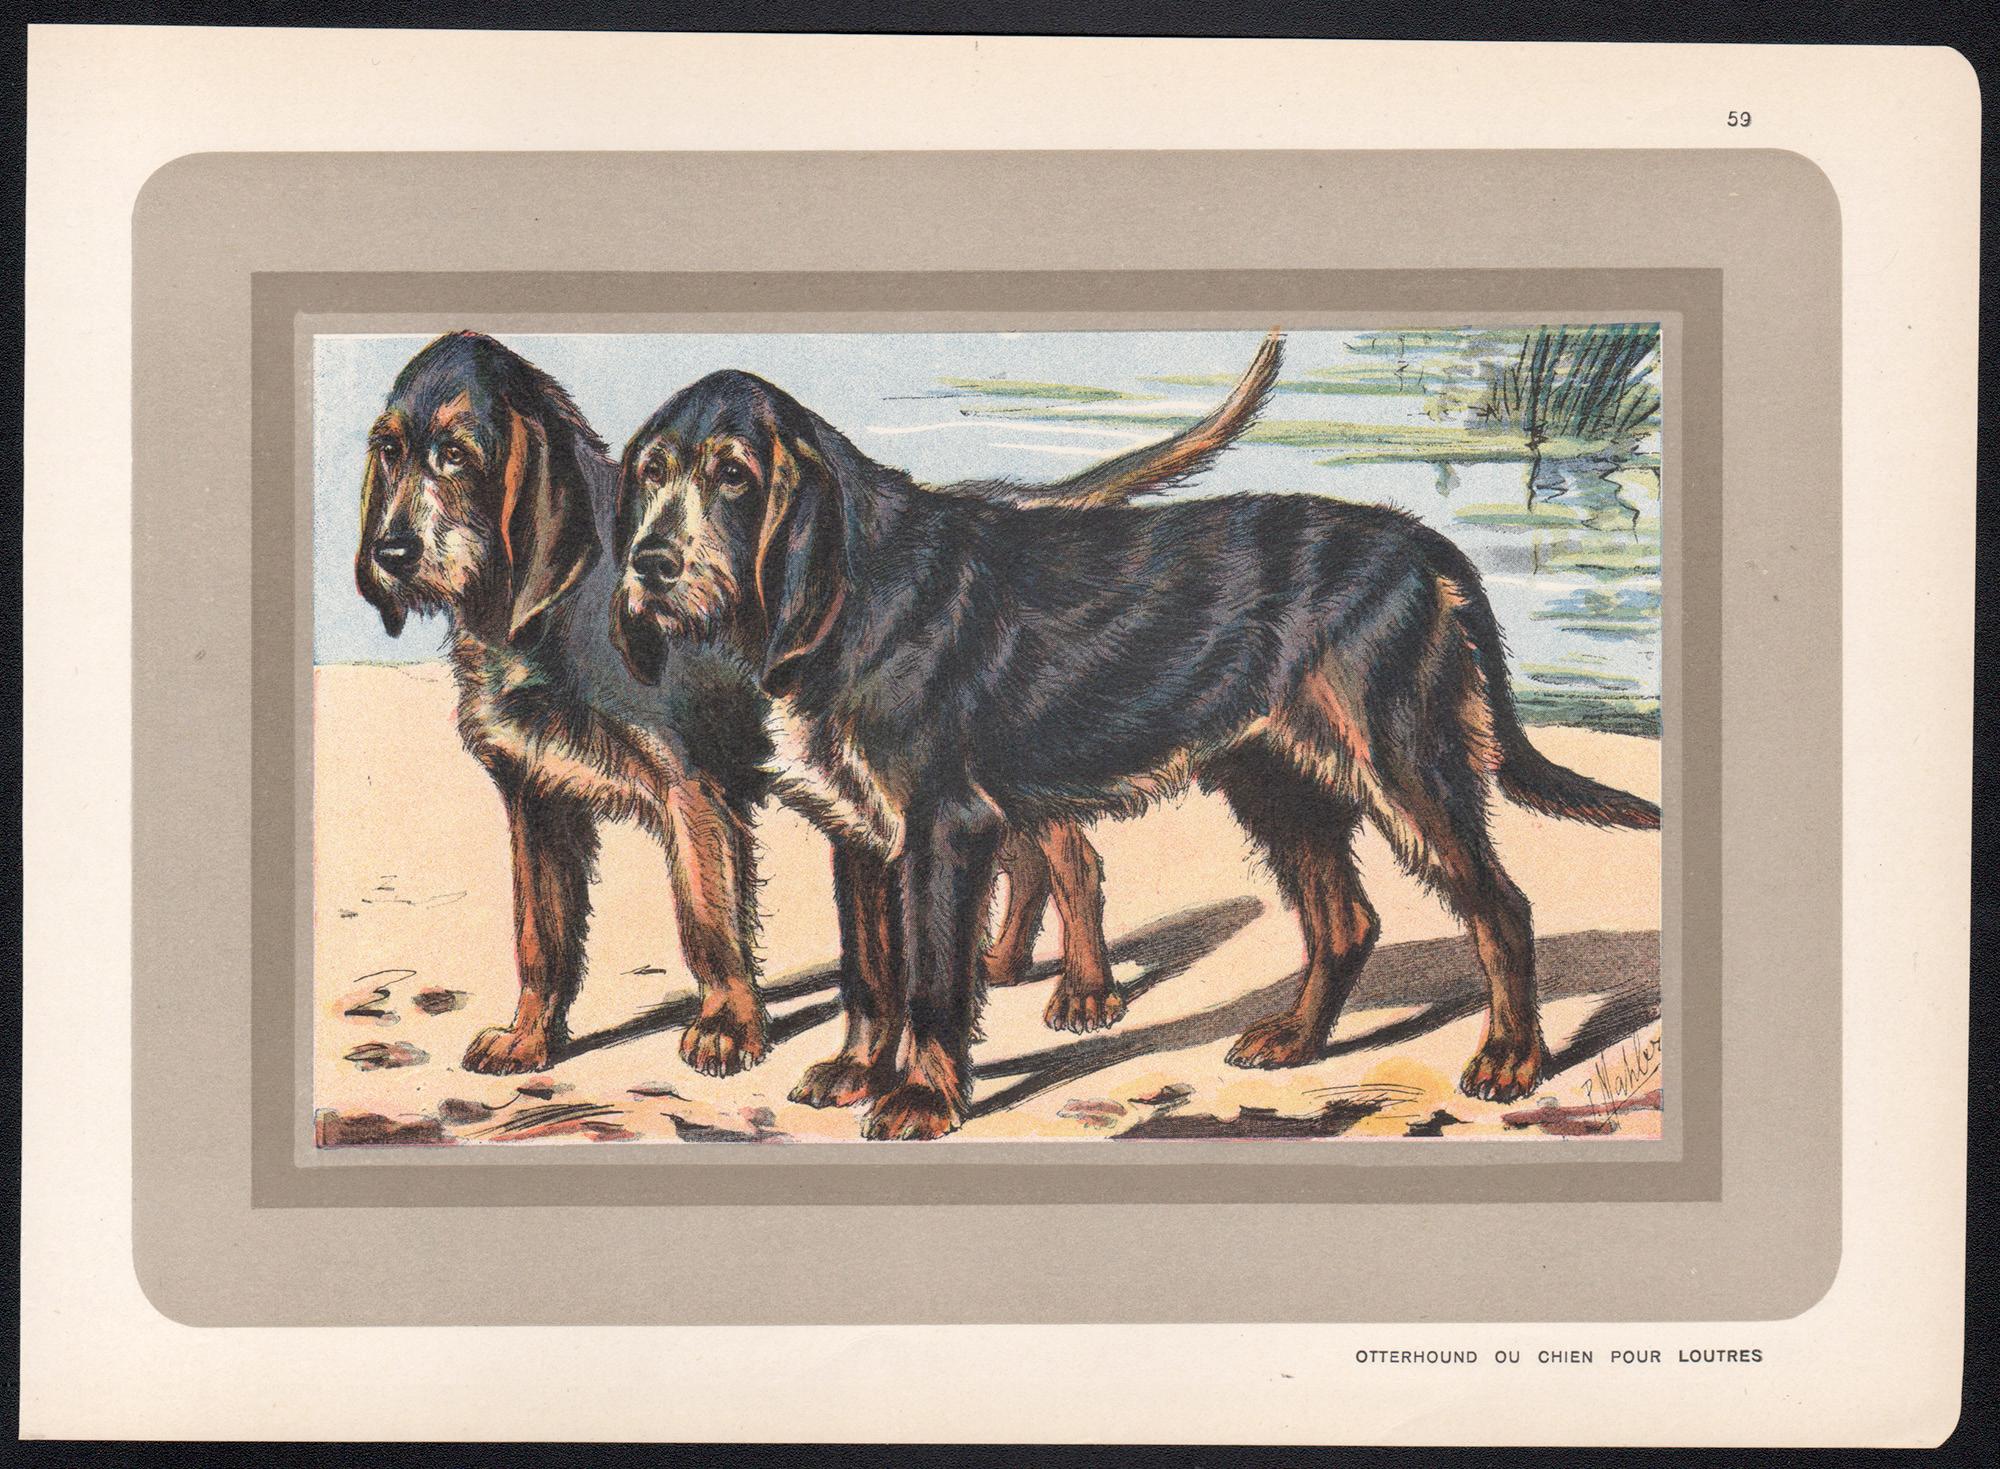 Otterhound Ou Chien Pour Loutres, French hound, dog chromolithograph, 1930s - Print by P. Mahler